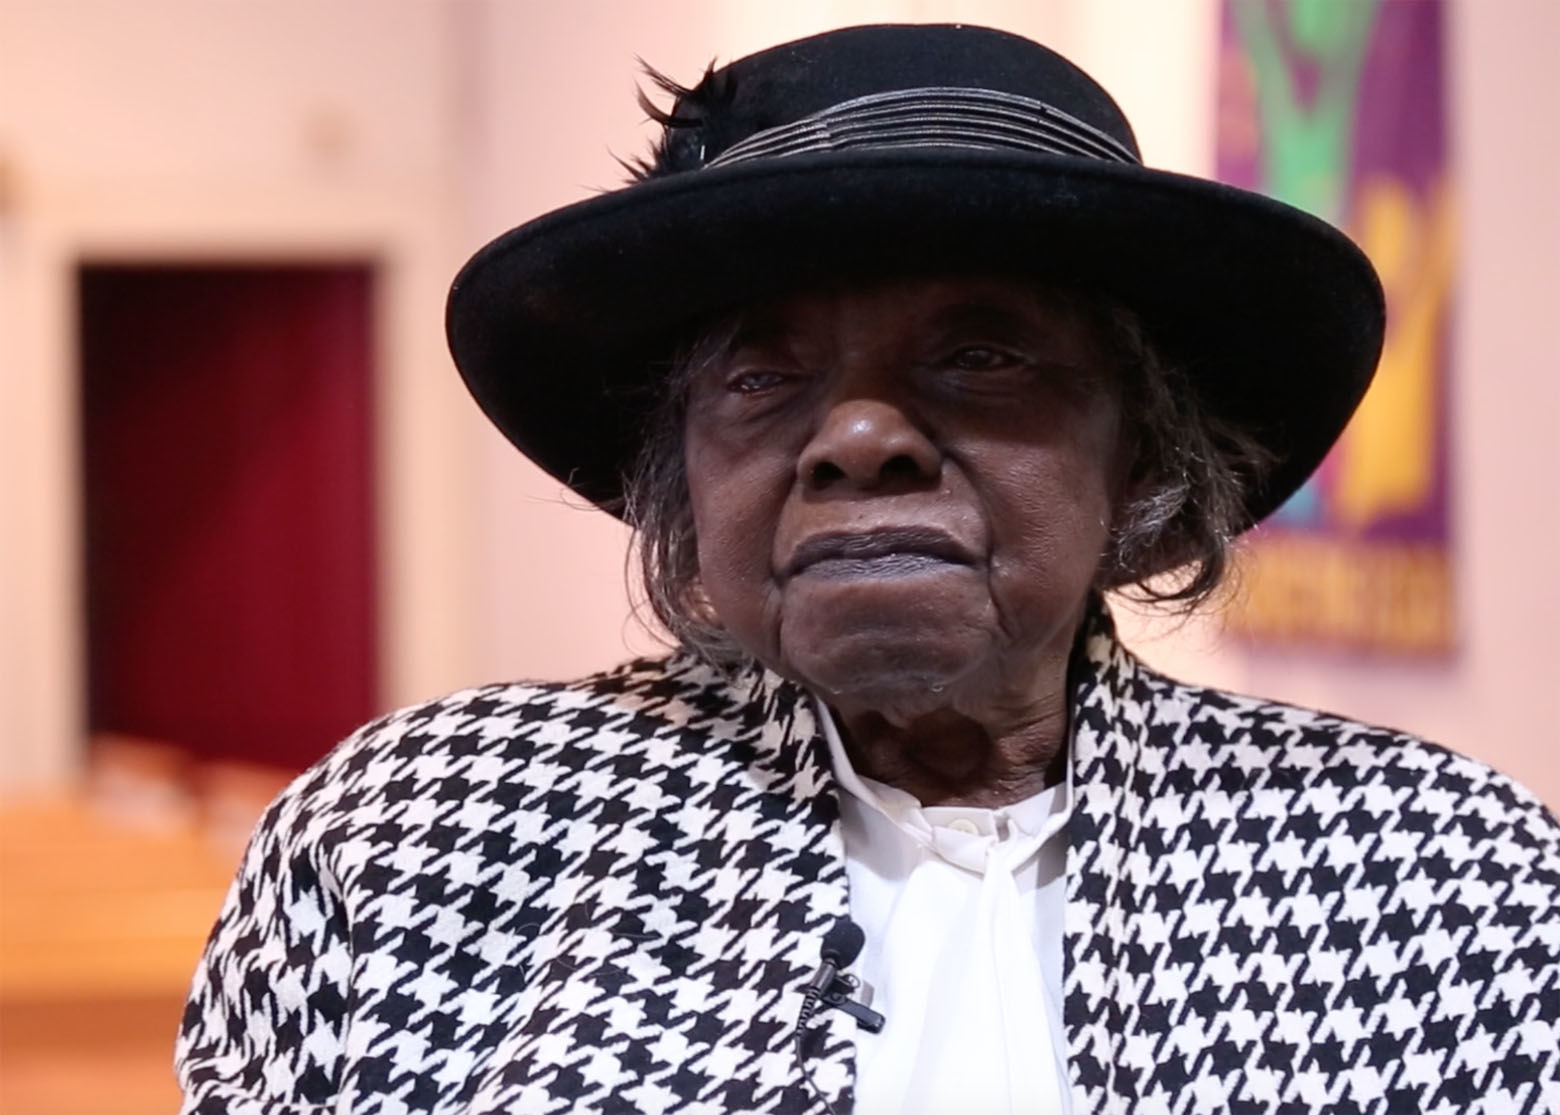 Hattie Bynum, 94, led Mount Joy Soul Saving Station for more than 61 years -- through the D.C. riots, urban renewal and all the other changes that half a century has wrought on the landscape of the city. Her son is now the head pastor. (WTOP/Omama Altaleb)